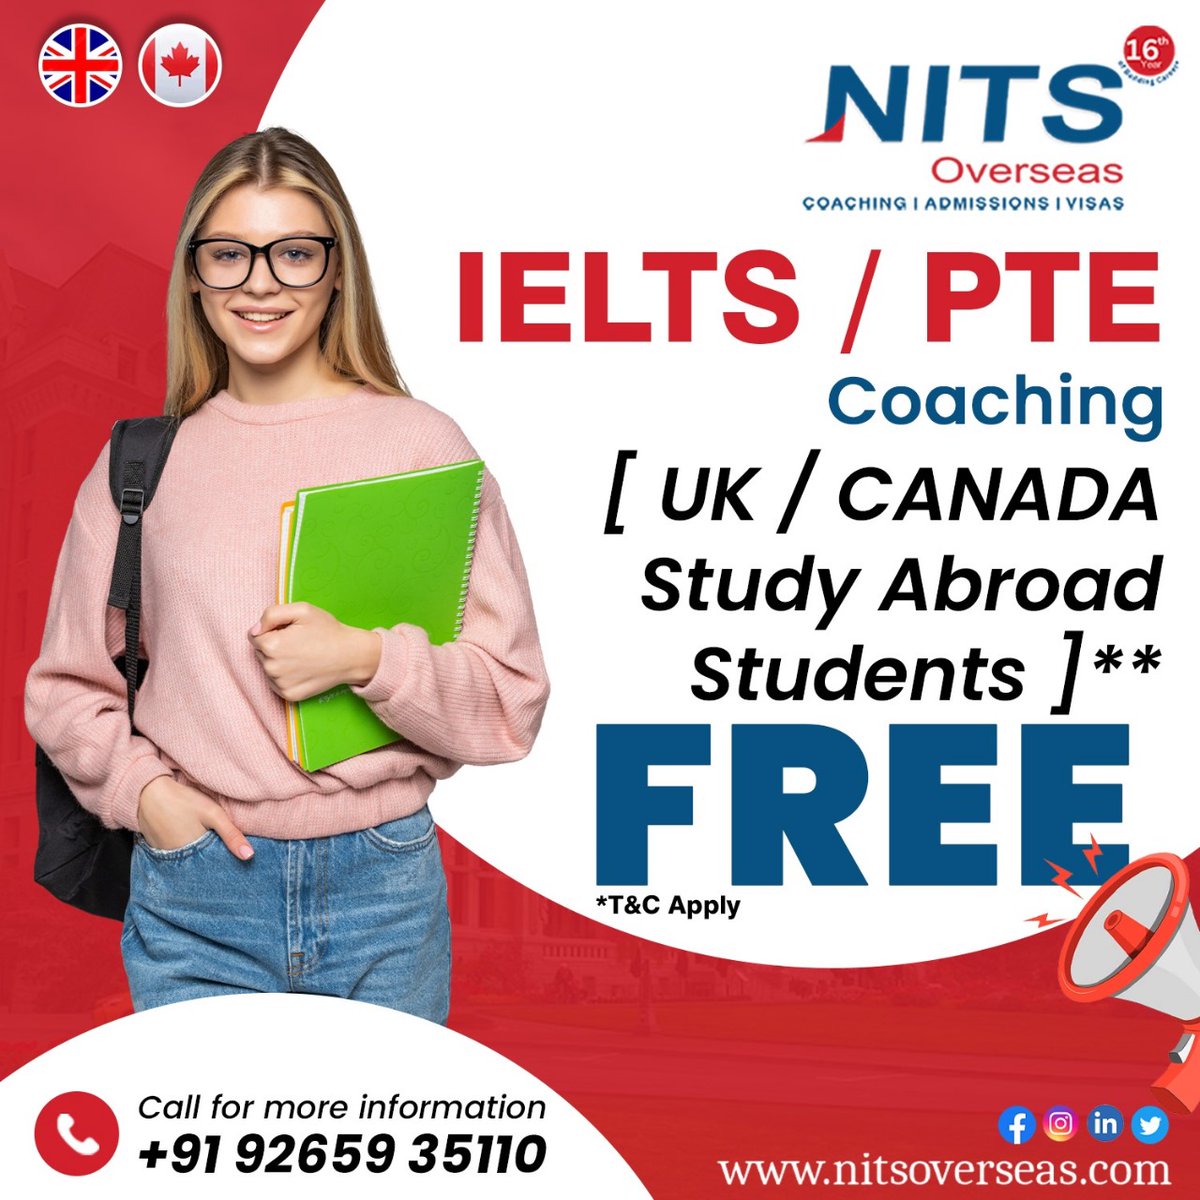 Why wait to chase your dreams? Jumpstart your study abroad journey with our FREE IELTS/PTE coaching, tailored for students aspiring to study in the UK or Canada. Start your transformative journey today!🎓📚

📞: +91 9265935110

#nitsoverseas #studyabroad #education #ielts